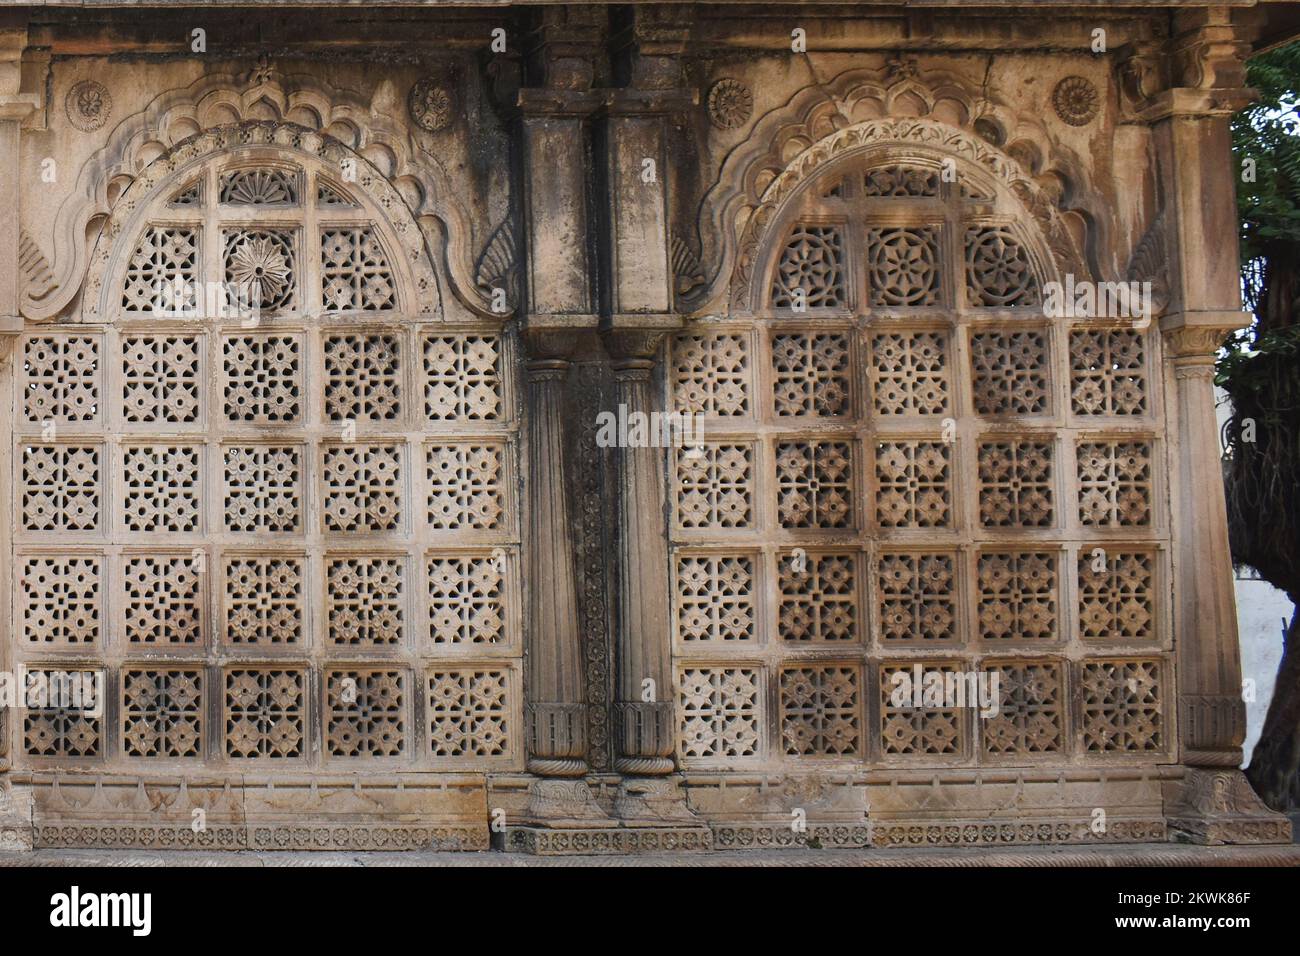 Maqbara's side close up view near the tomb of Sultan Ahmed, architecture exterior wall with intricate carvings in stone, Ahmedabad, Gujarat, India Stock Photo